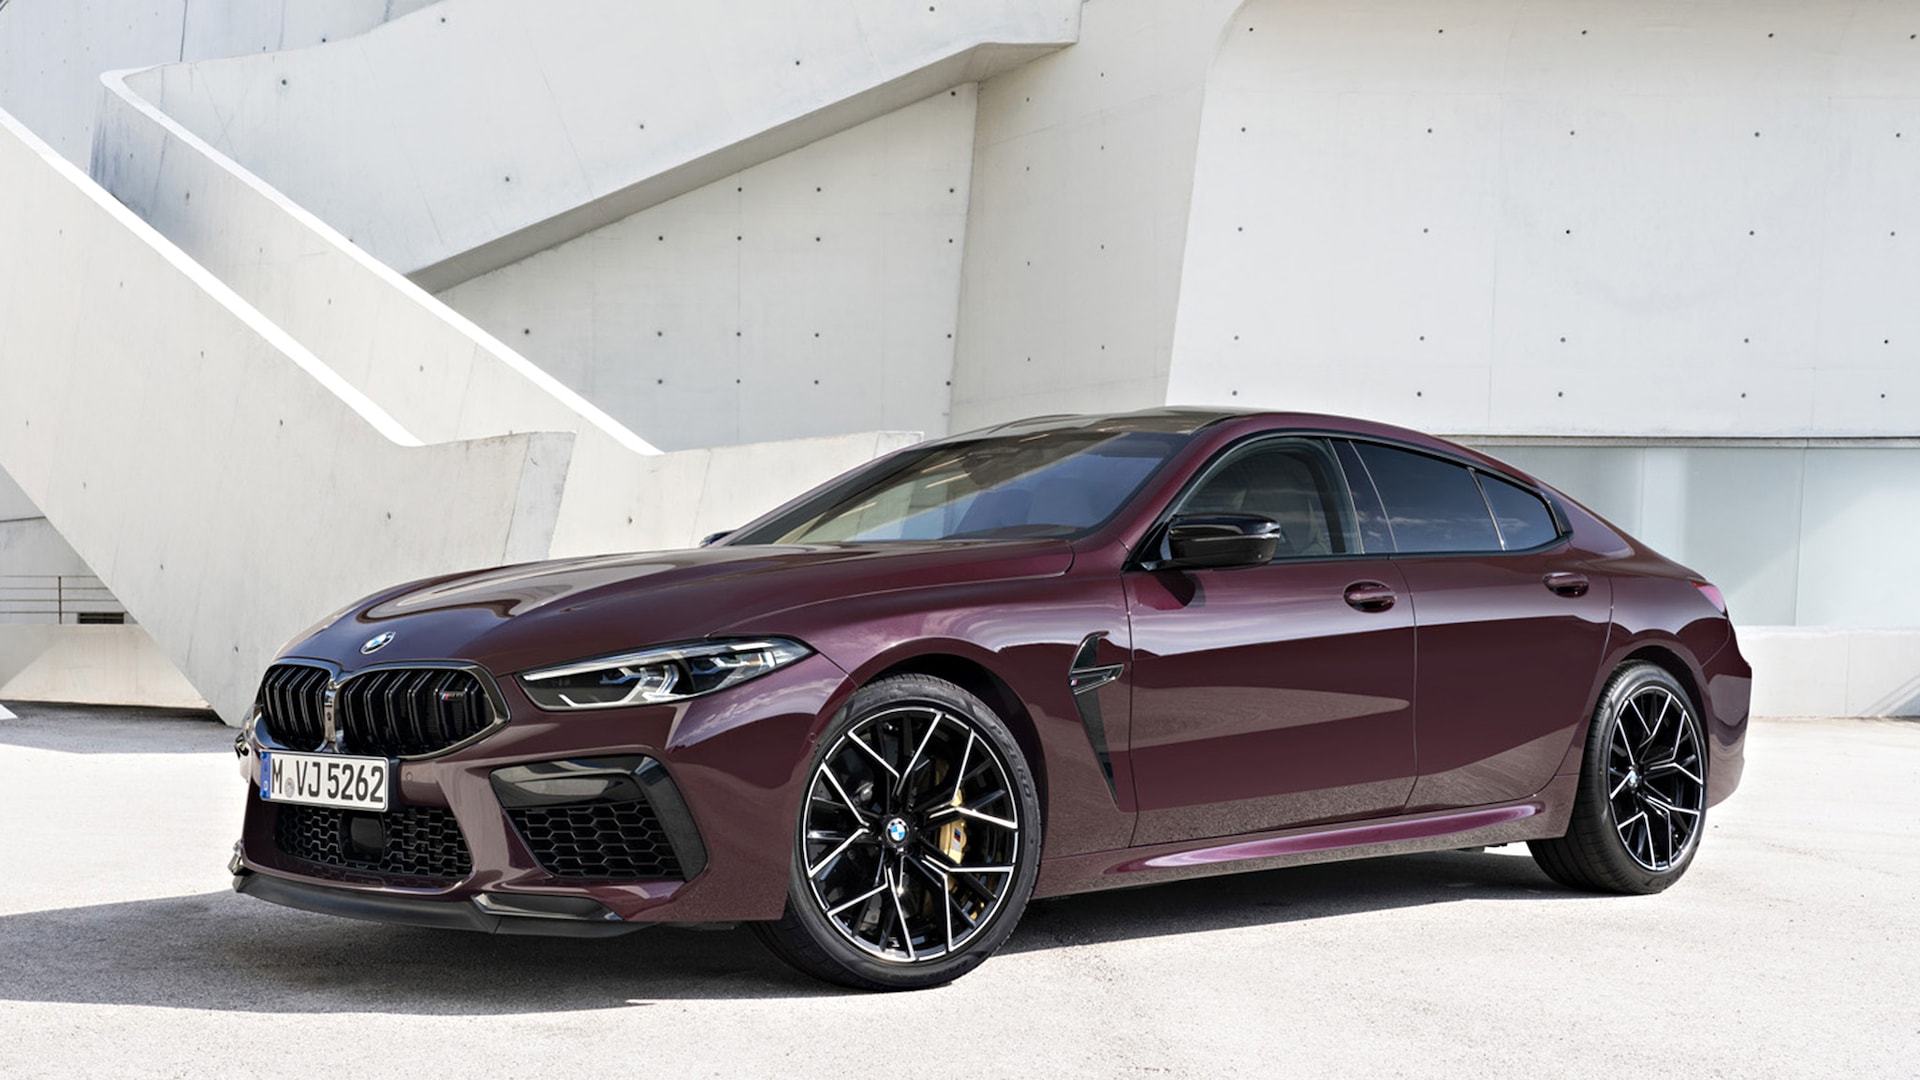 2021 BMW M8 Prices, Reviews, and Photos - MotorTrend